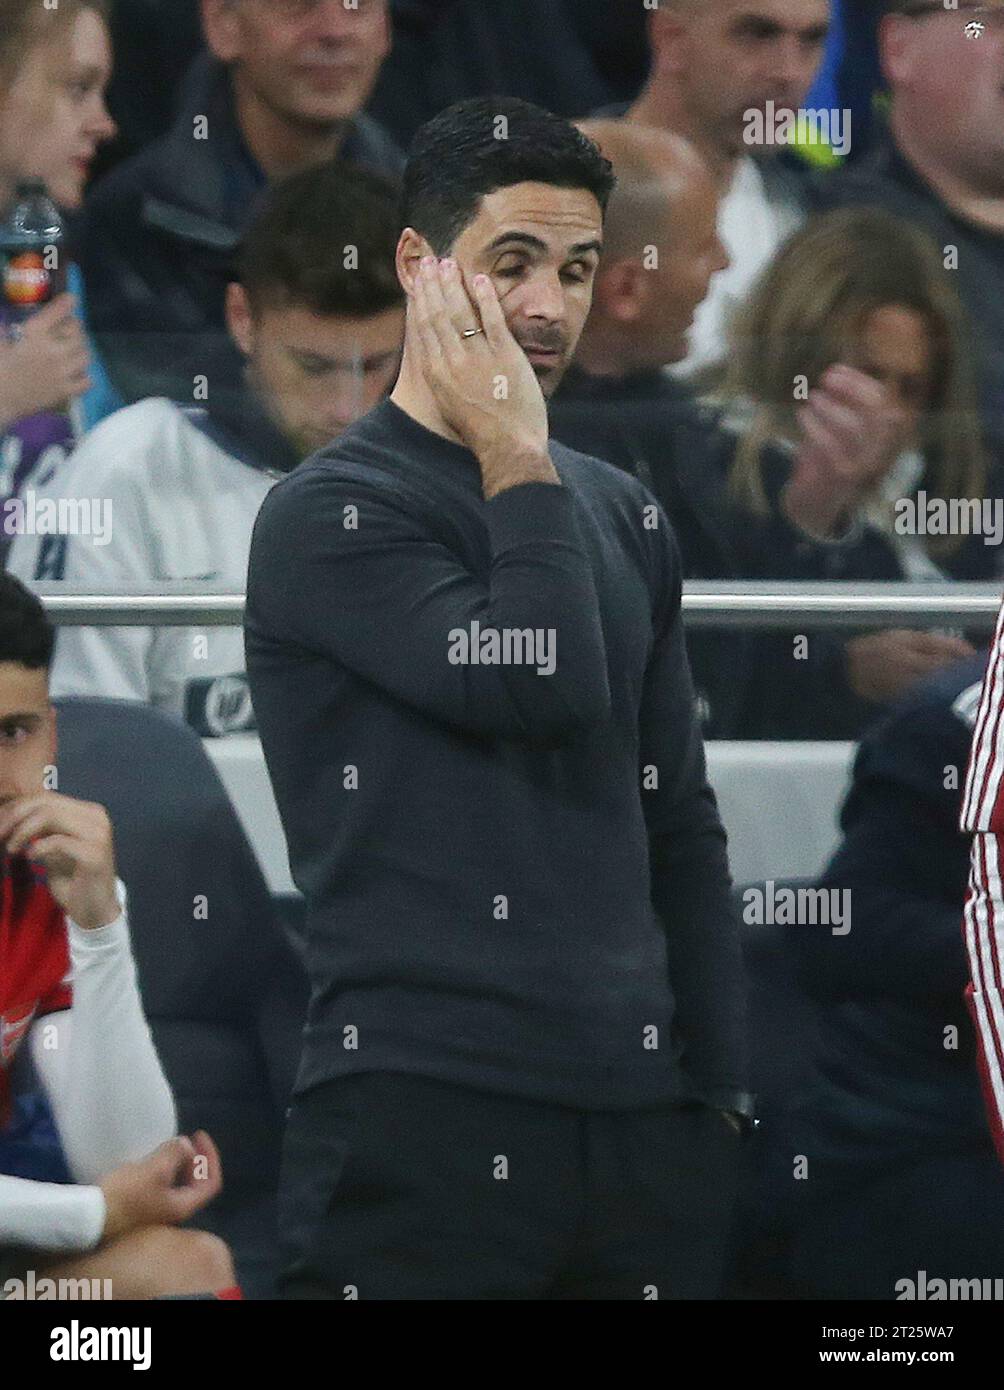 Mikel Arteta Manager of Arsenal looks disappointed & dejected against Tottenham Hotspur.- Tottenham Hotspur v Arsenal, Premier League, Tottenham Hotspur Stadium, London, UK - 12th May 2022 Editorial Use Only - DataCo restrictions apply Stock Photo